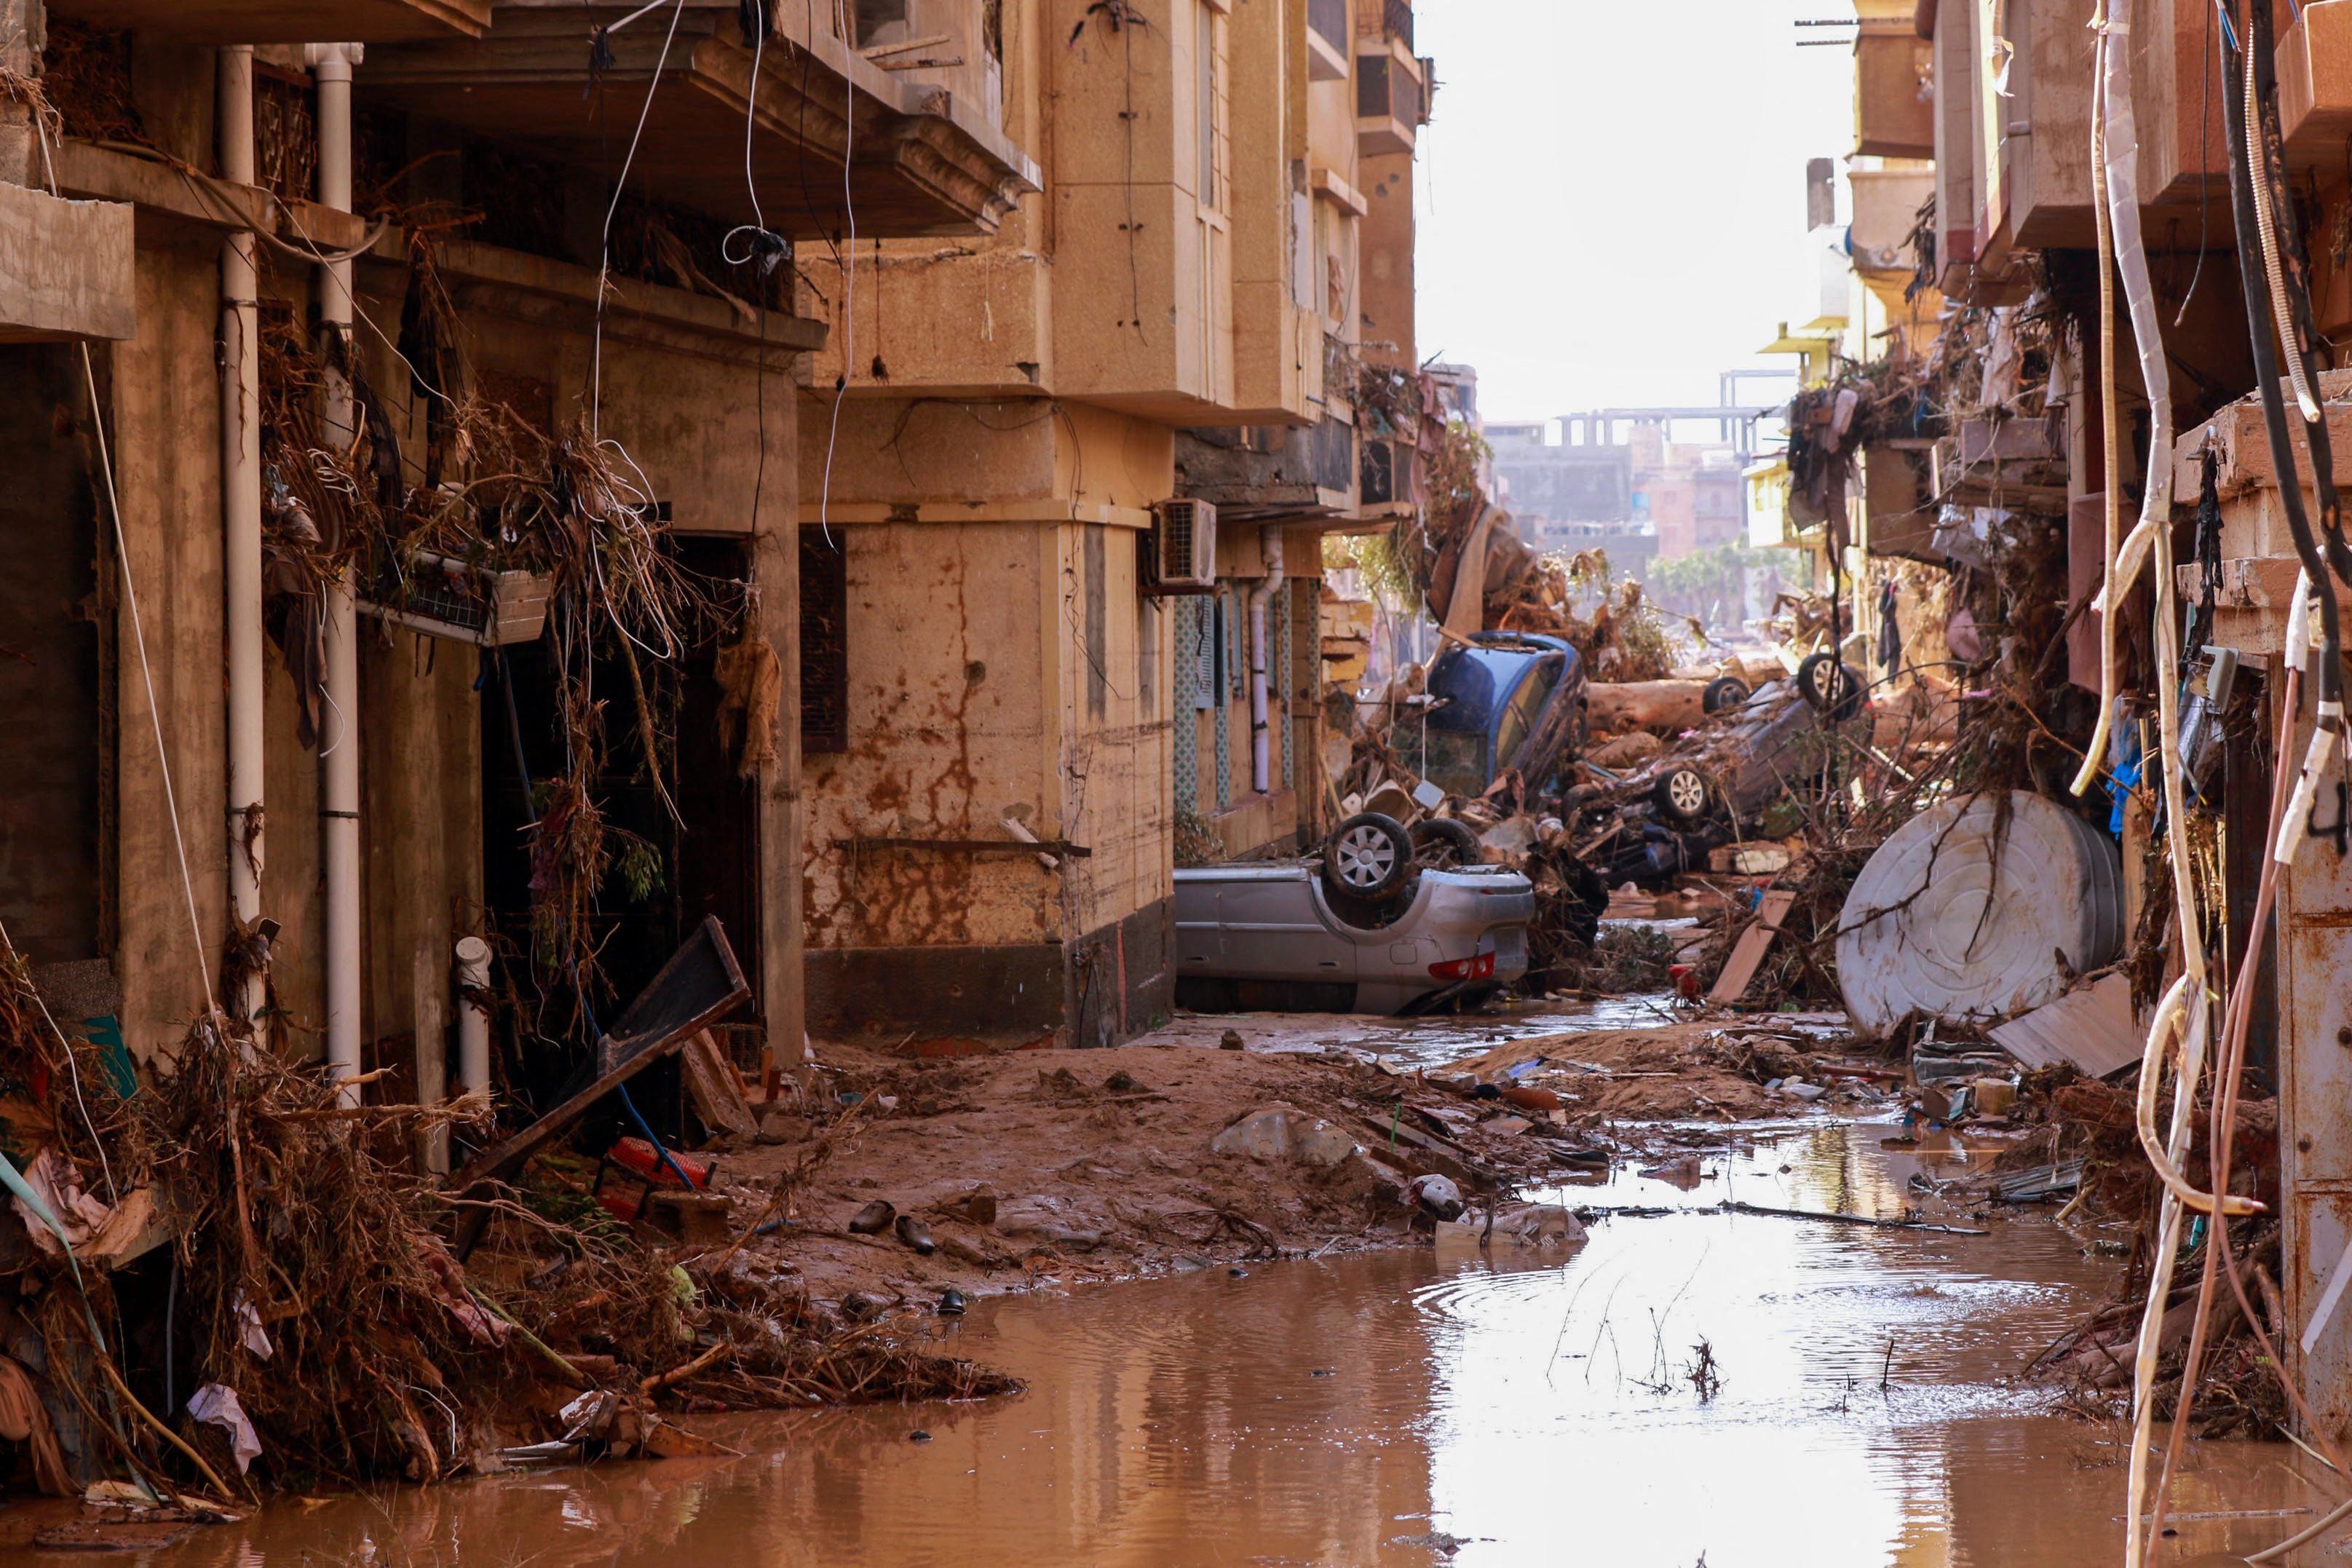 About a quarter of the eastern Libya city of Derna has been wiped out by flash flooding